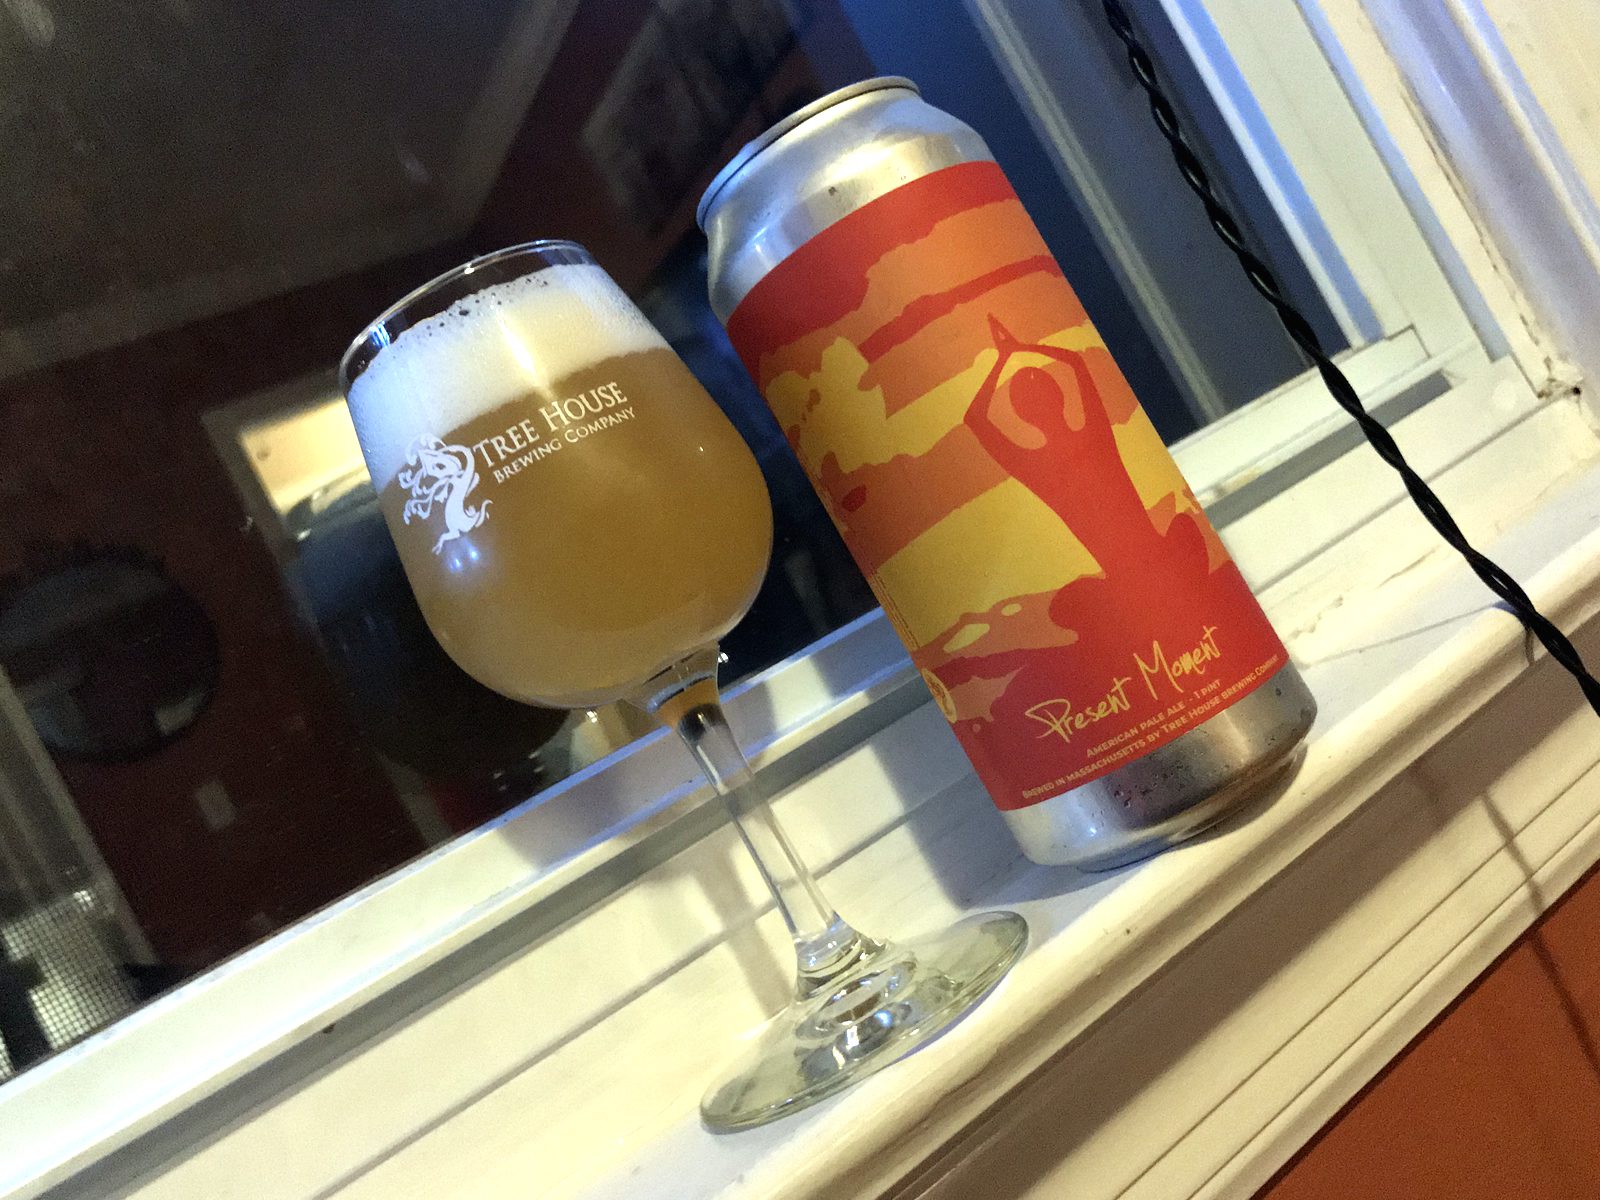 Tree House Brewing Company: Present Moment